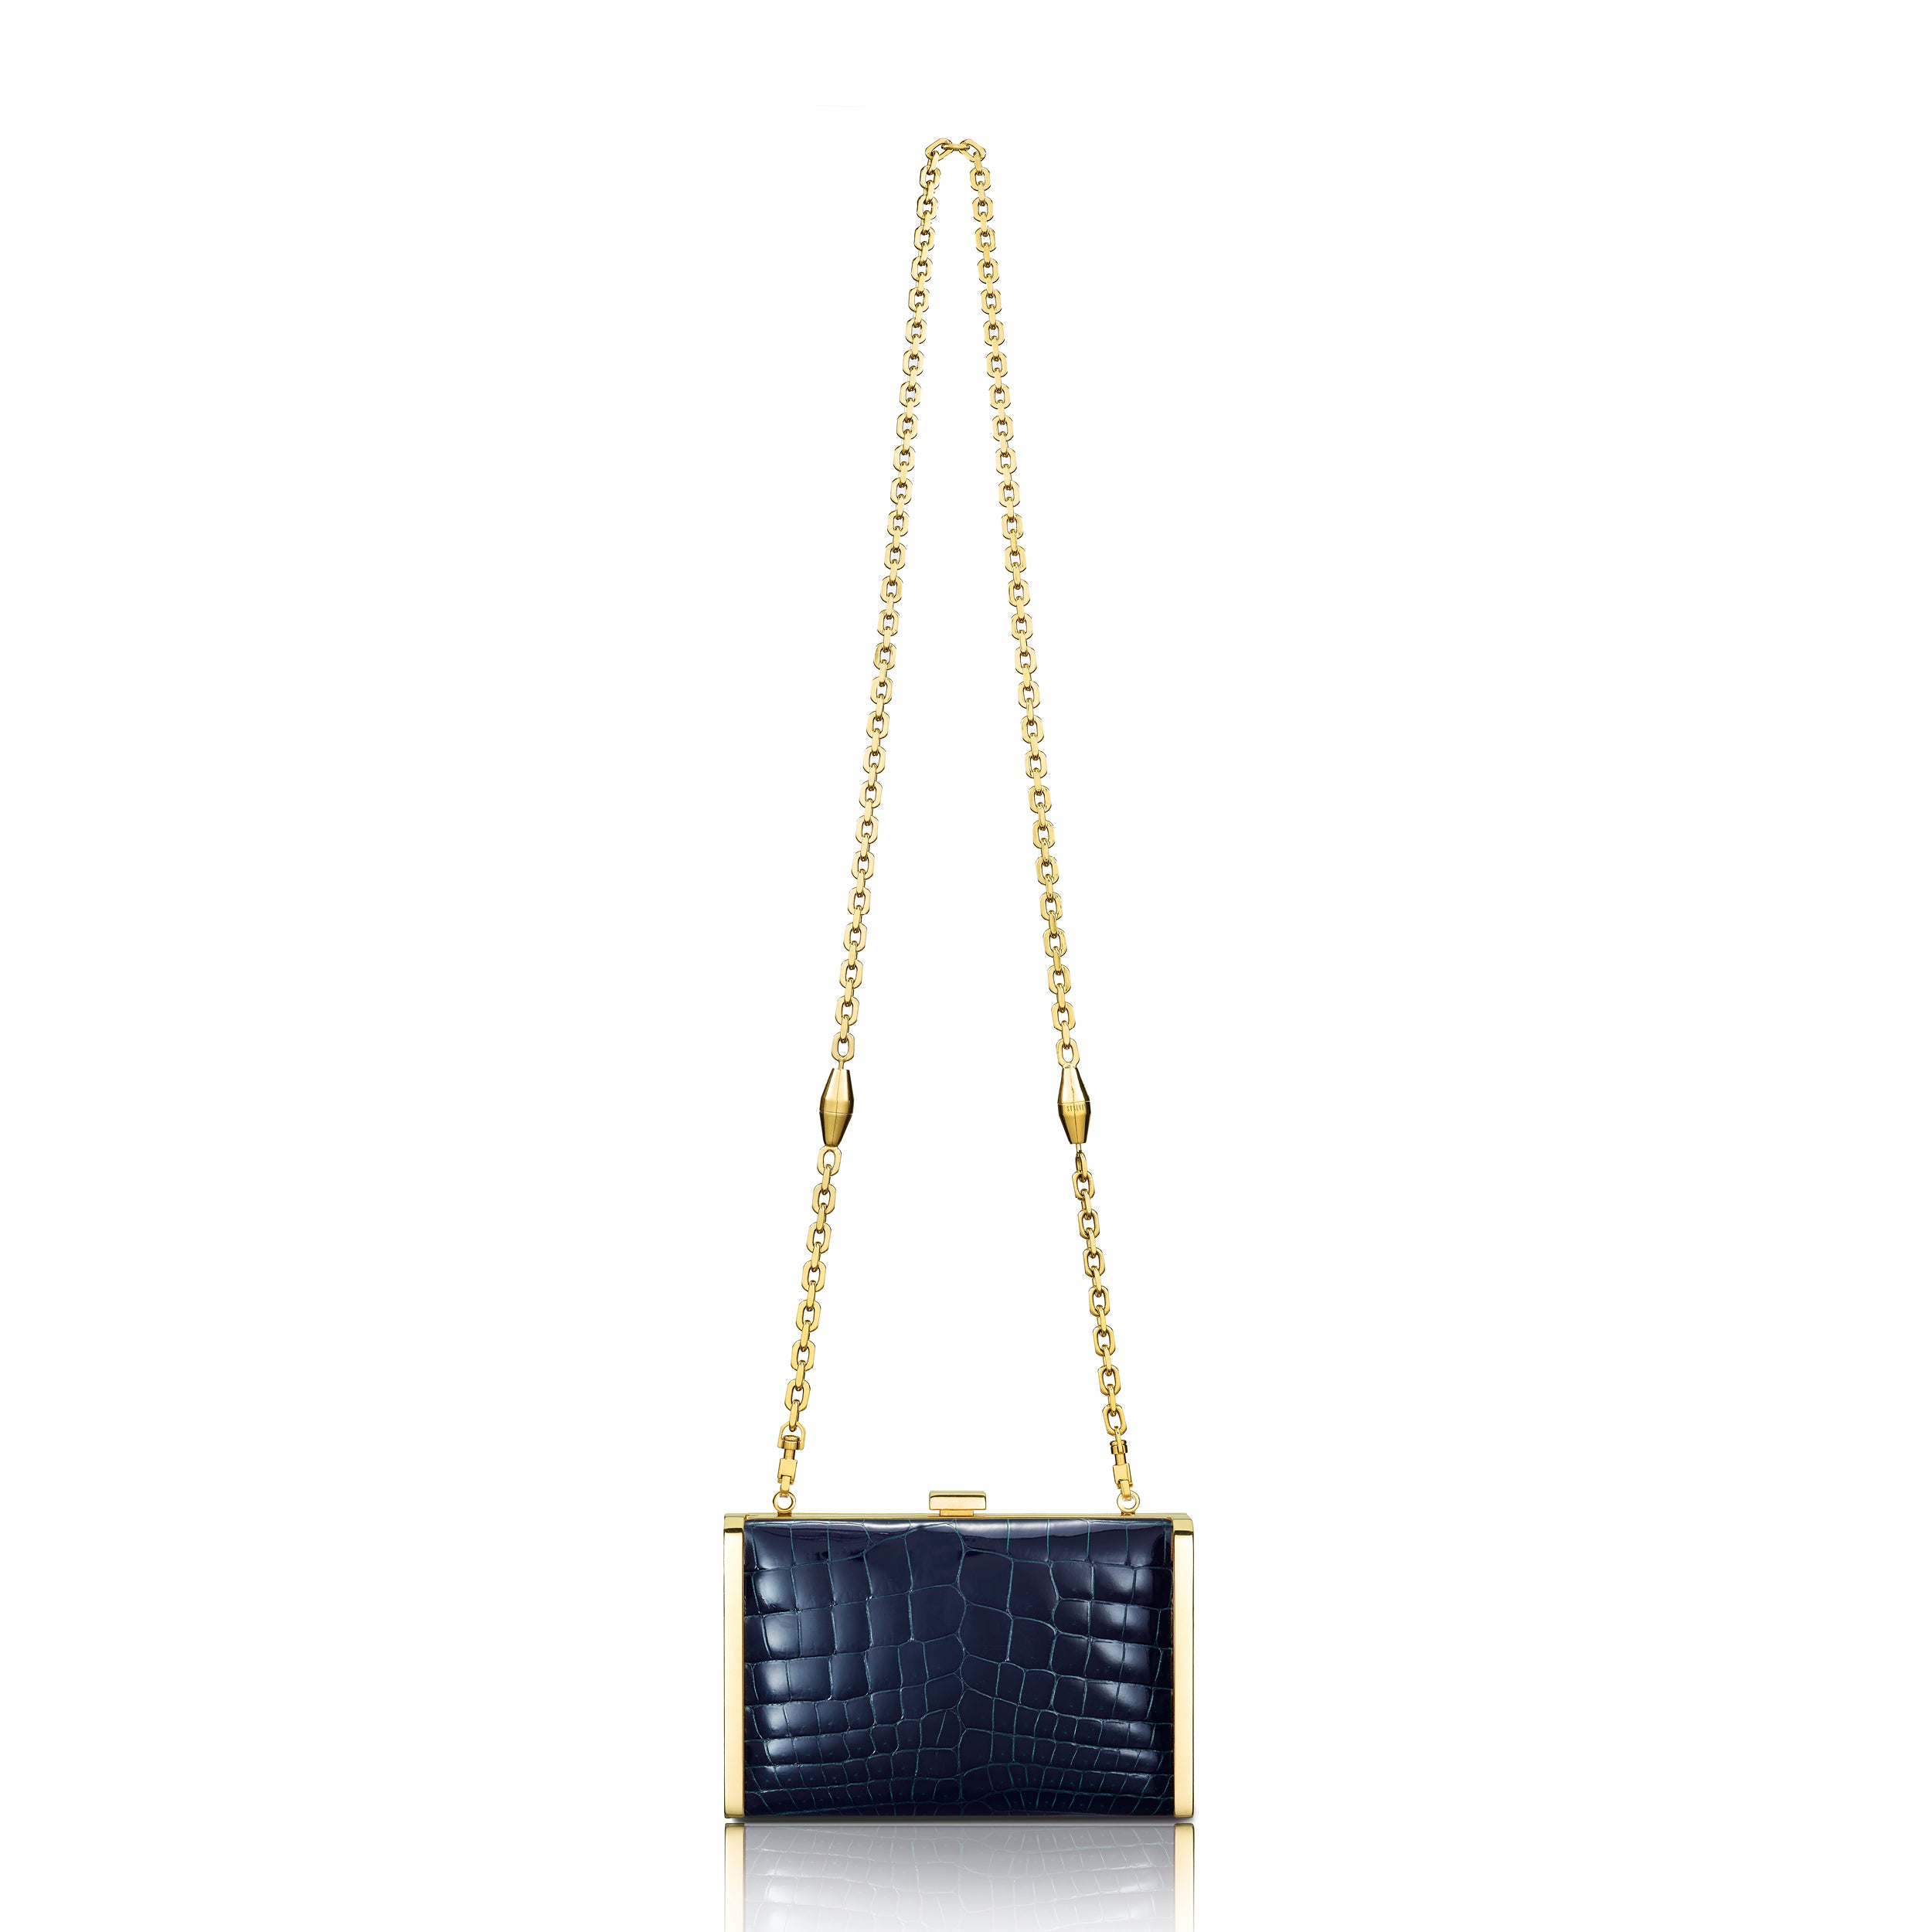 STALVEY Rounded Clutch in Marine Blue Alligator with 24kt Gold Hardware Front View with Chain